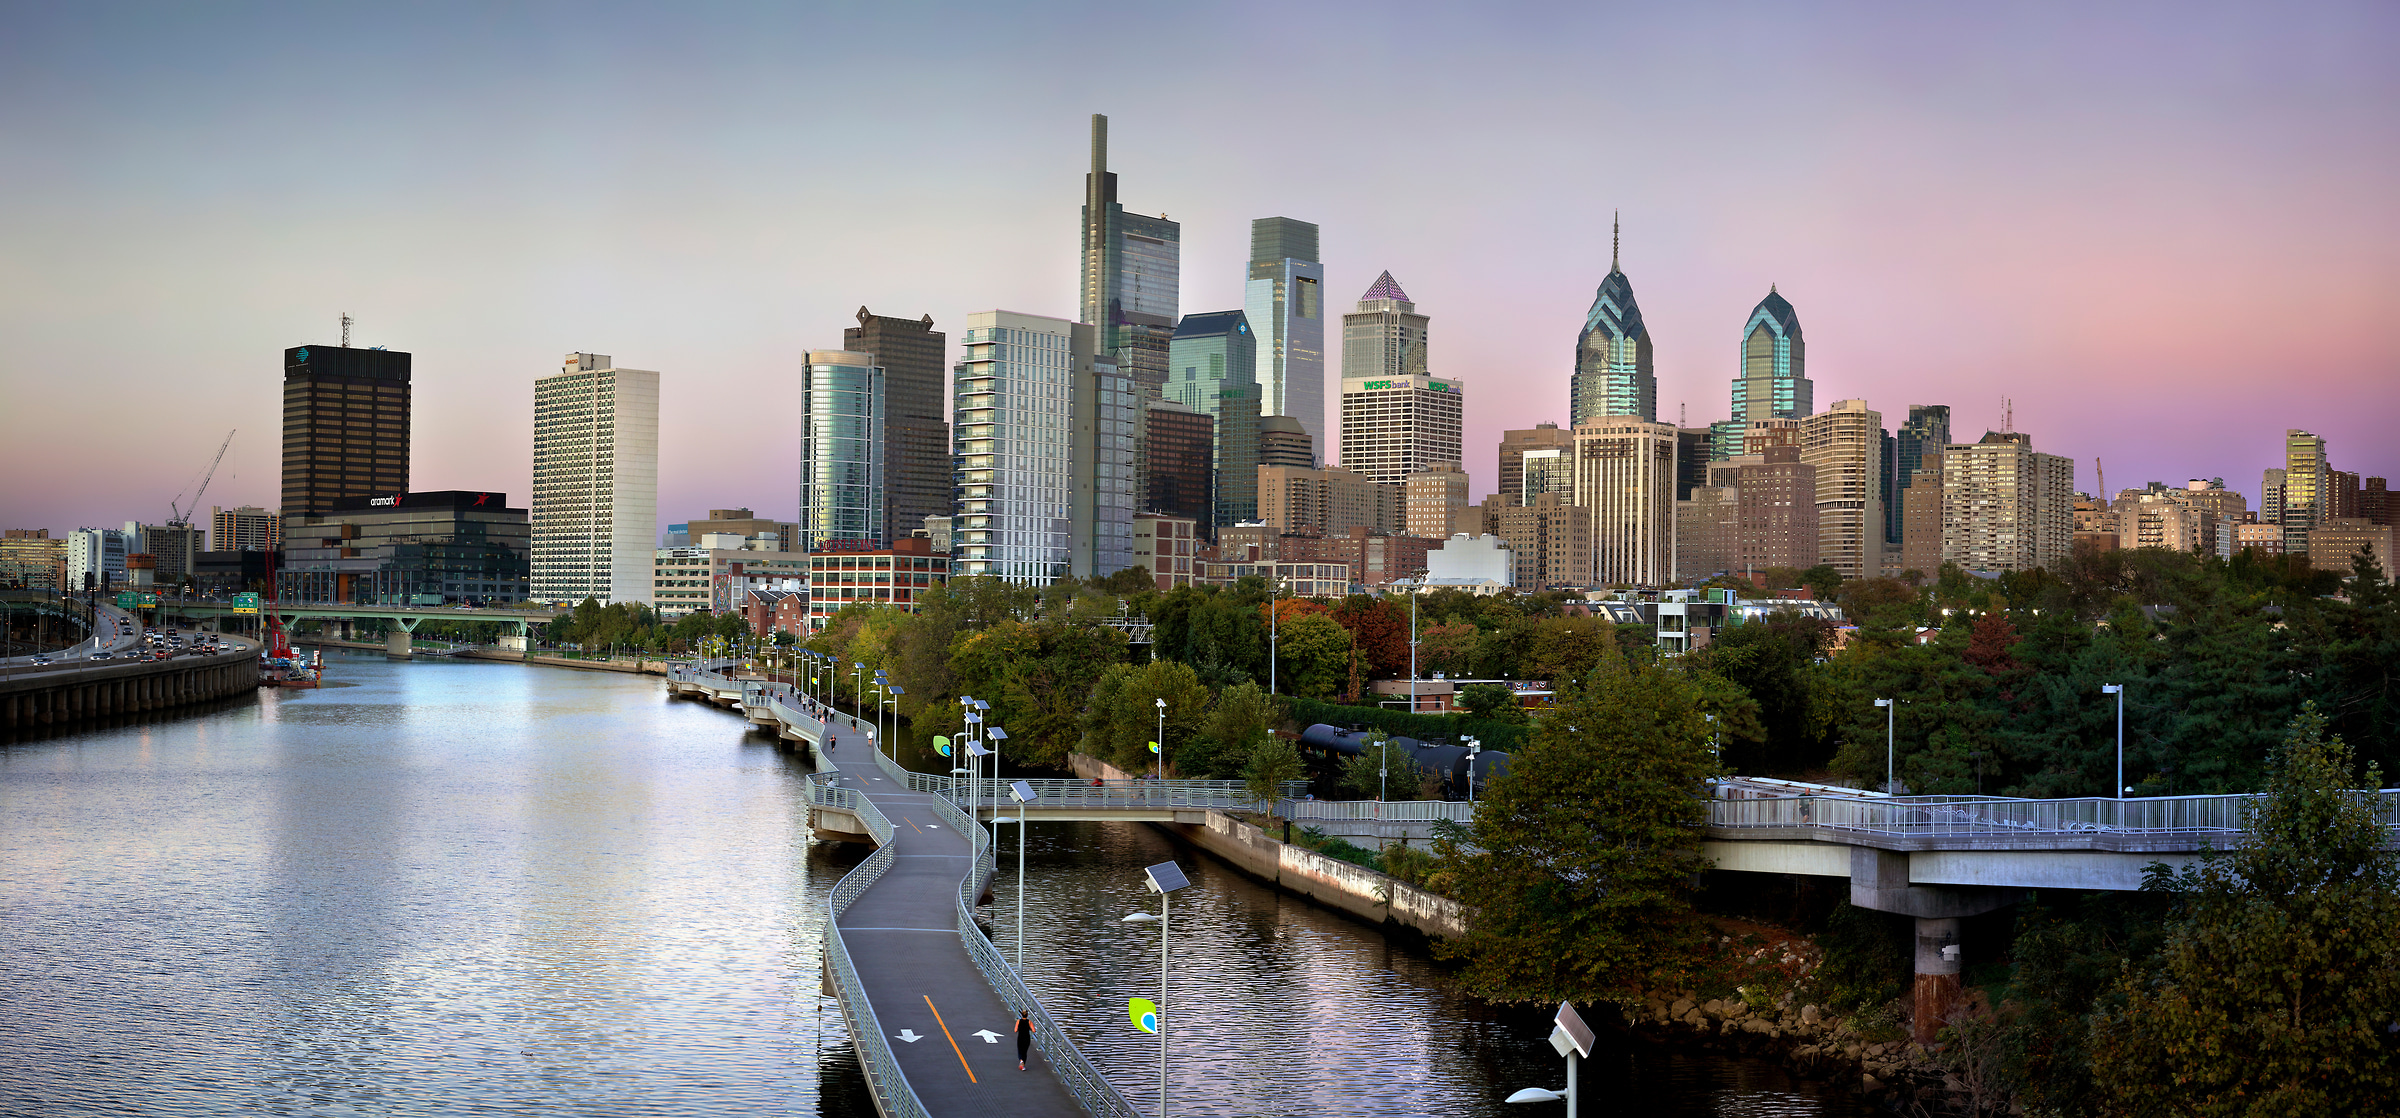 419 megapixels! A very high resolution, large-format VAST photo print of the Philadelphia skyline; photograph created by Phil Crawshay in Downtown Philadelphia